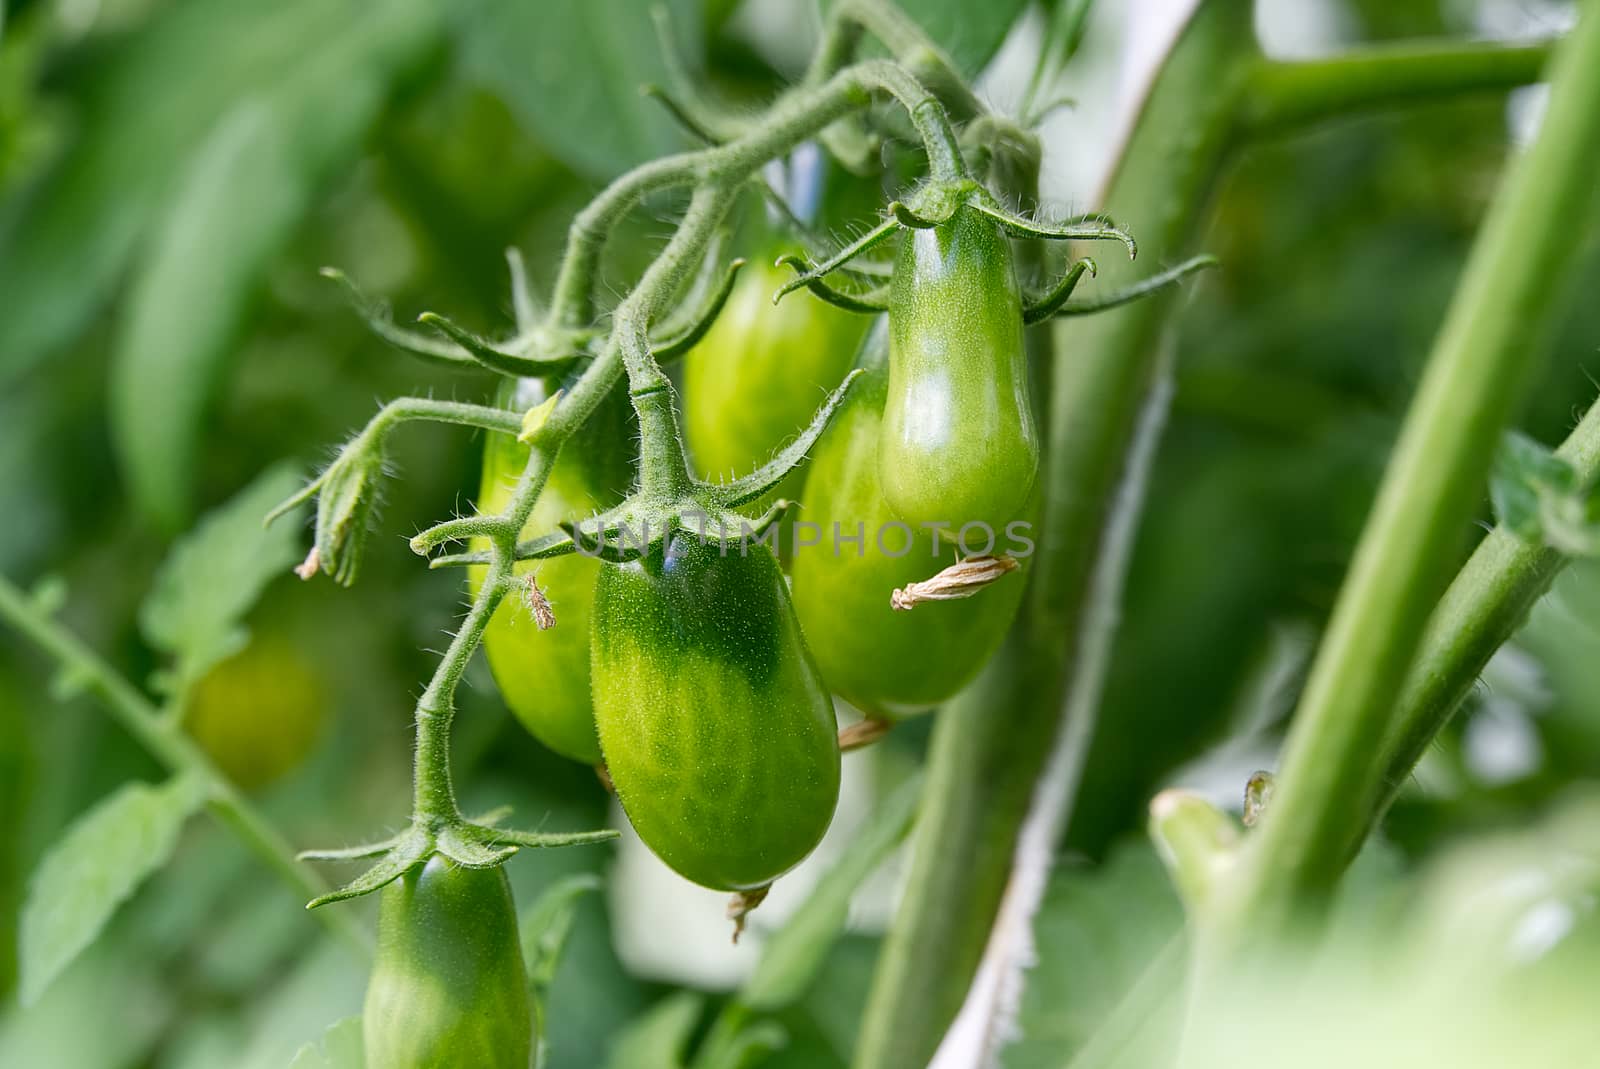 Unripe Green Tomatoes in a greenhouse, DIY cultivation concept